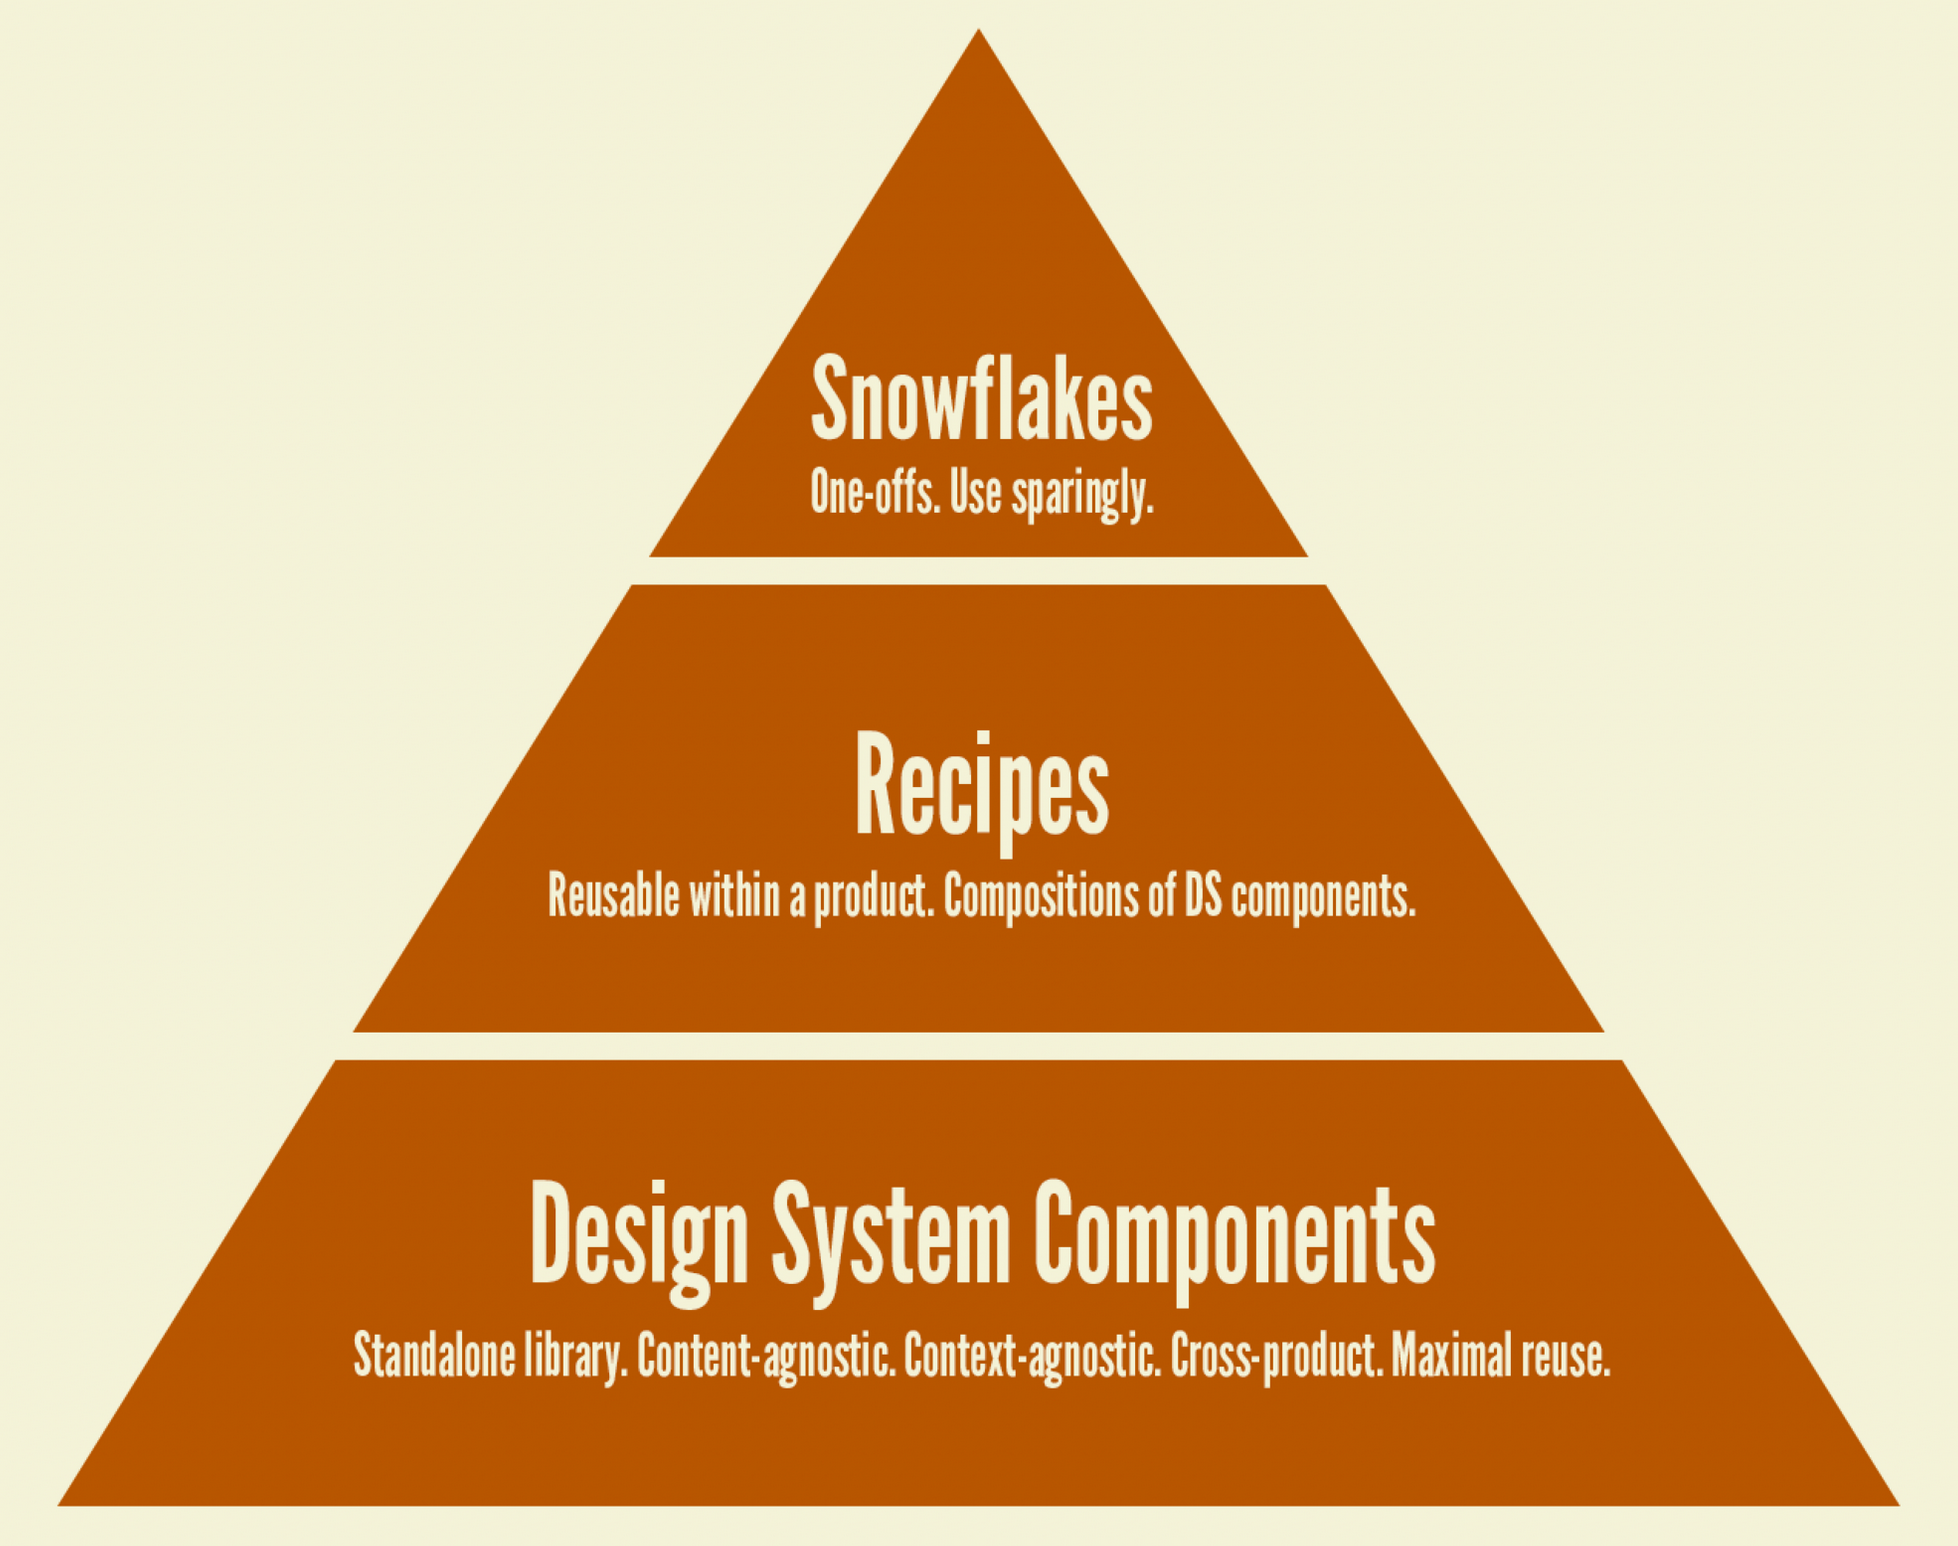 Layered system in form of a pyramid: design system components as base,\n  recipes in the middle and snowflakes (one-offs) on the top